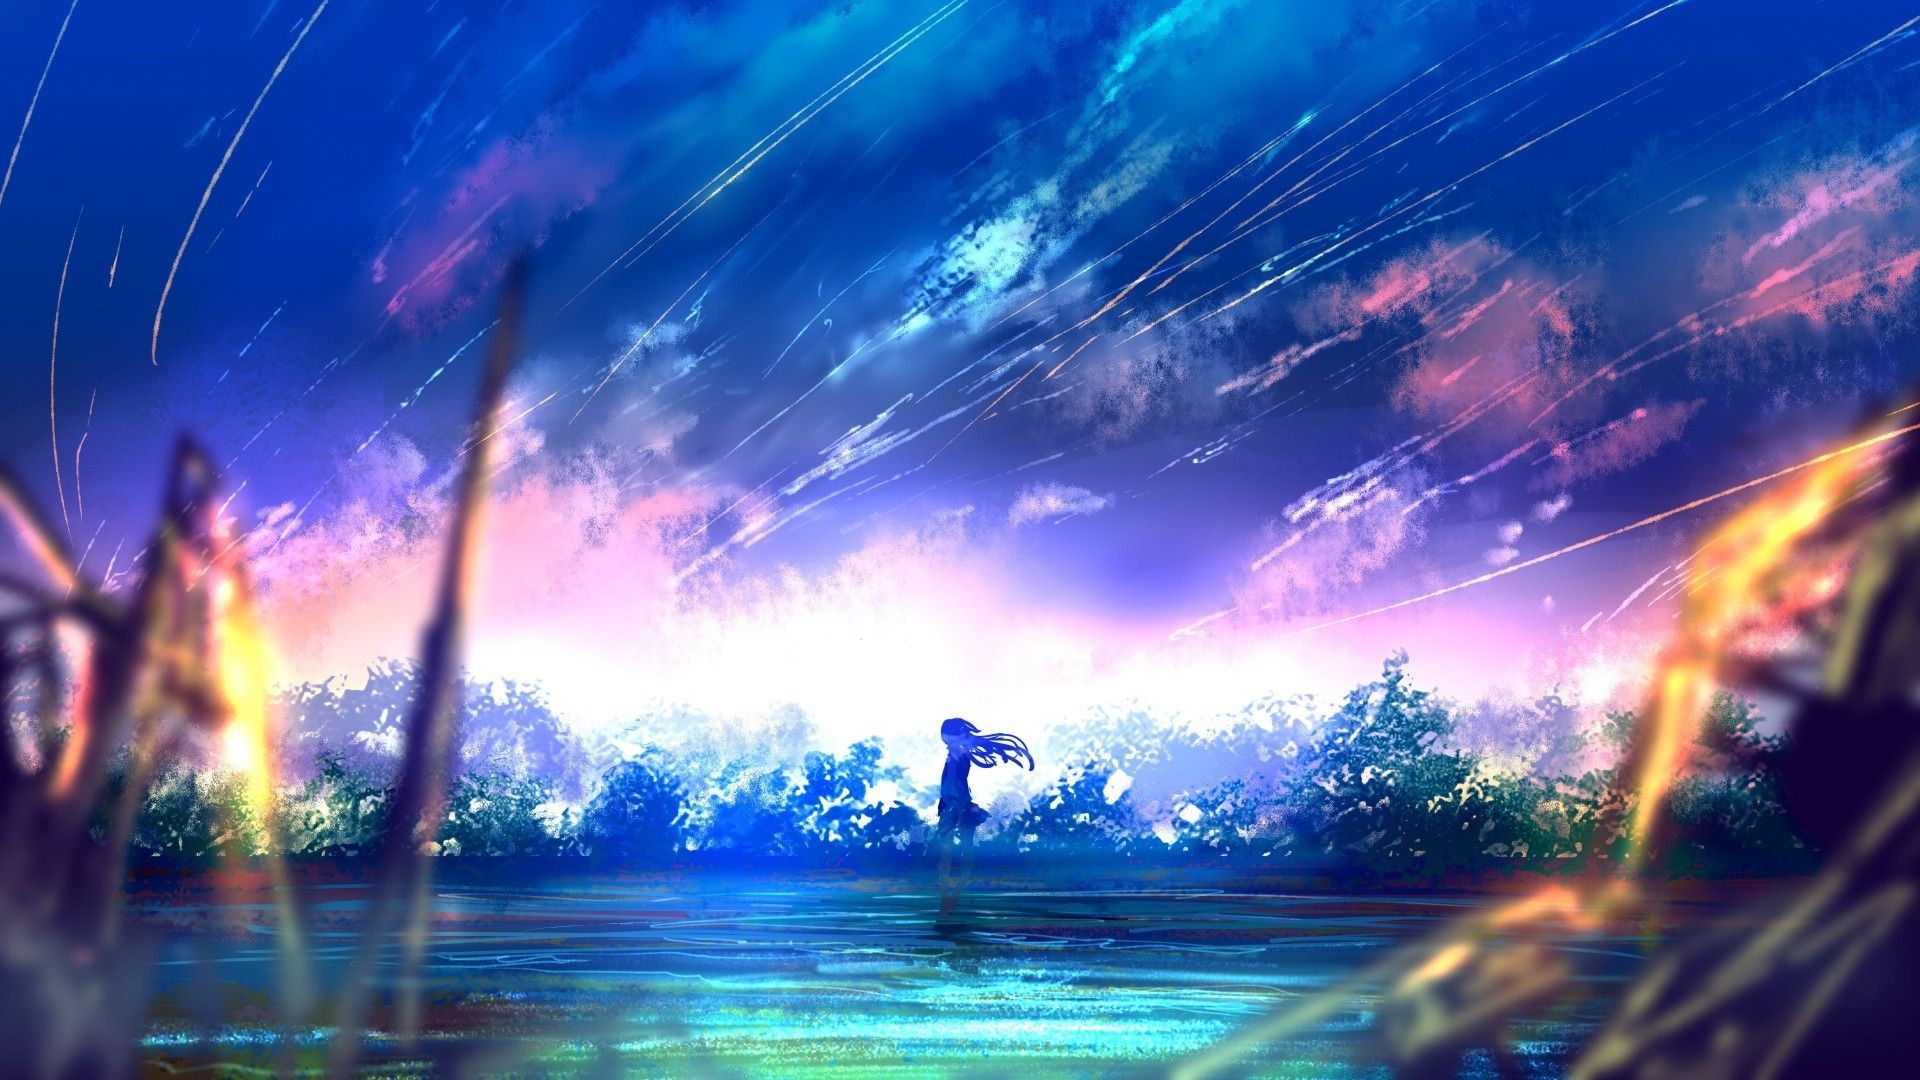 Colorful Anime Scenery Wallpaper Free Colorful Anime